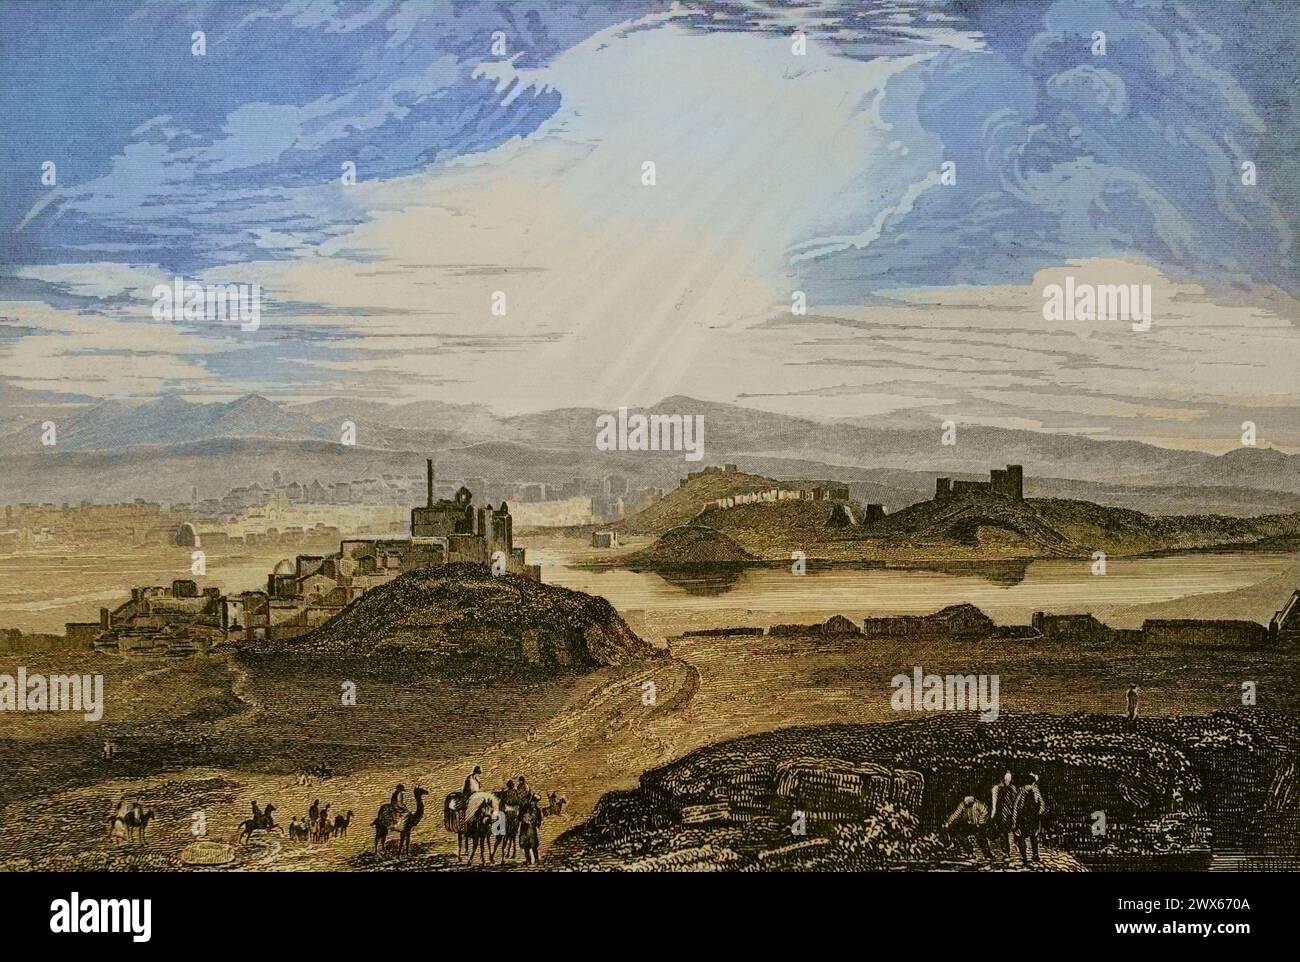 Ancient Mesopotamia. Nineveh (near the present-day Mosul, Iraq). Panoramic view of the city alongside the Tigris River. Engraving by Aubert. Later colouration. 'La Tierra Santa y los lugares recorridos por los profetas, por los apóstoles y por los cruzados' (The Holy Land and the sites traversed by the prophets, by the apostles and by the crusaders). Published in Barcelona by the printing house of Joaquin Verdaguer, 1840. Stock Photo